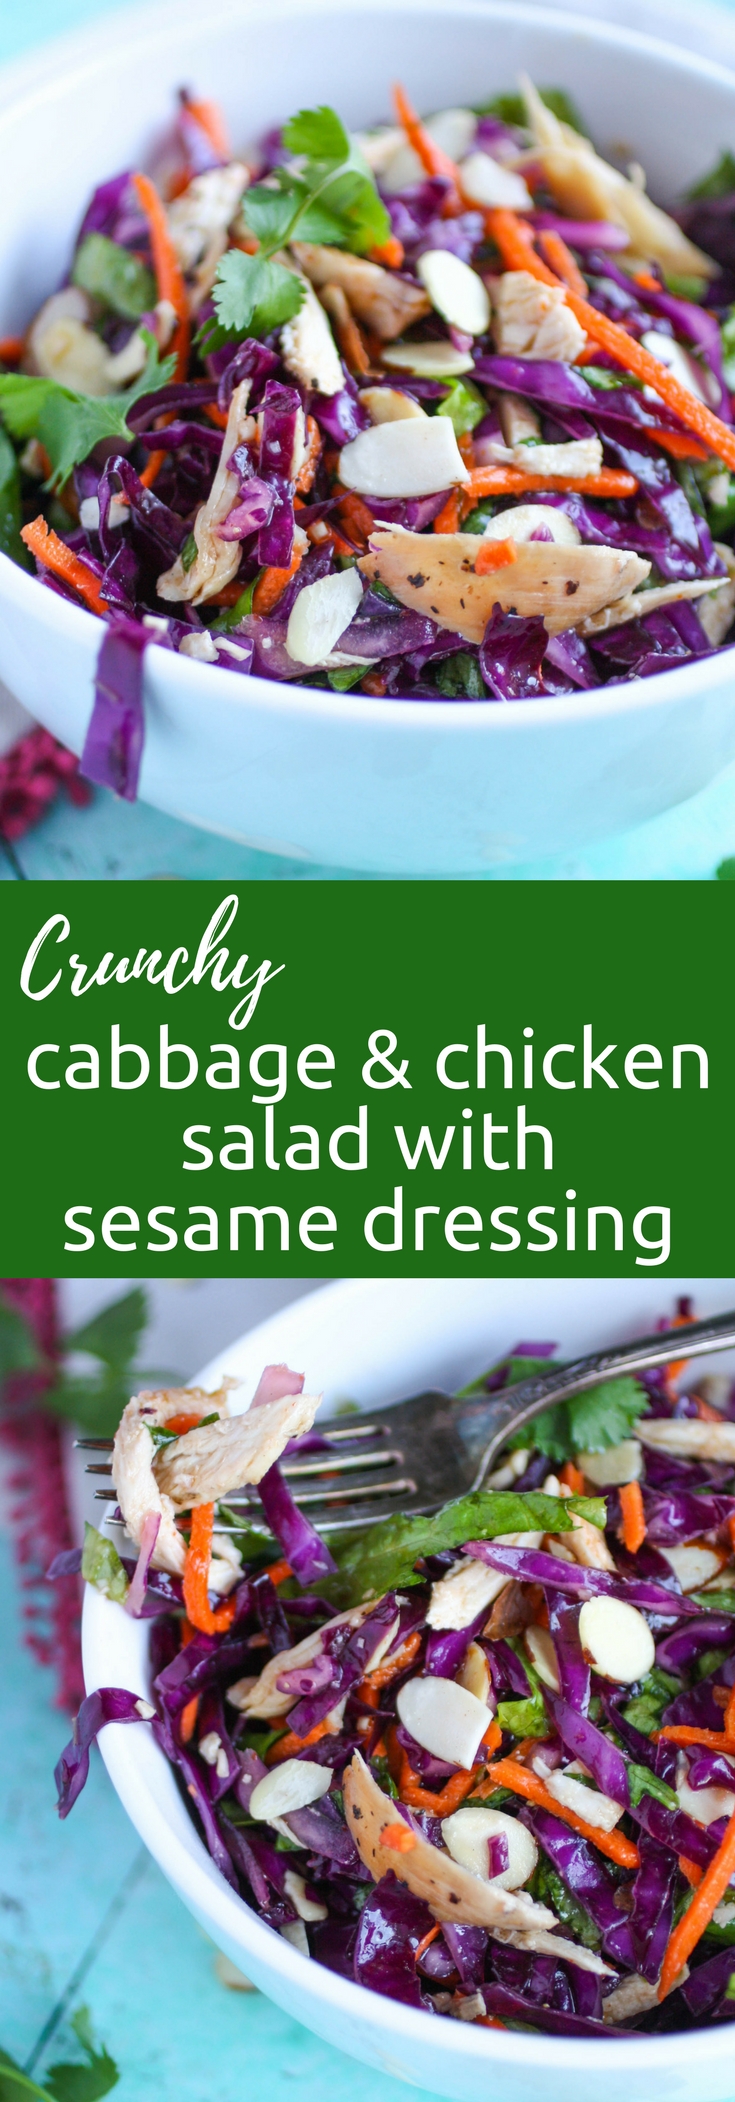 Crunchy Cabbage & Chicken Salad with Sesame Dressing is a salad to skin your teeth into. This crunchy cabbage salad is a delight in color and flavor!